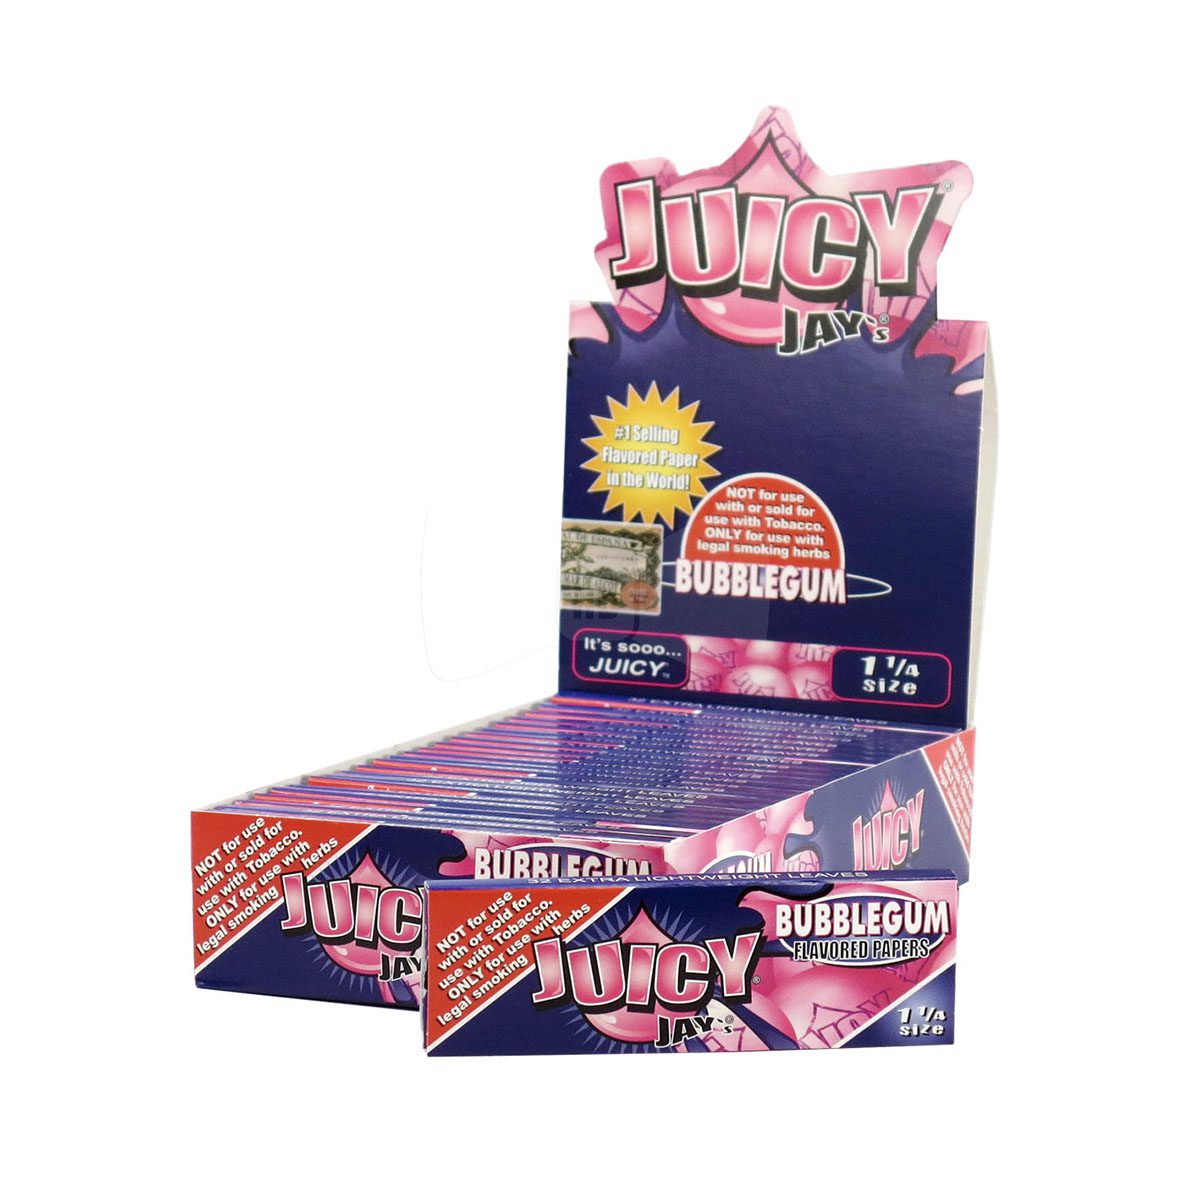 Bubblegum Rolling Papers By Juicy Jay’s